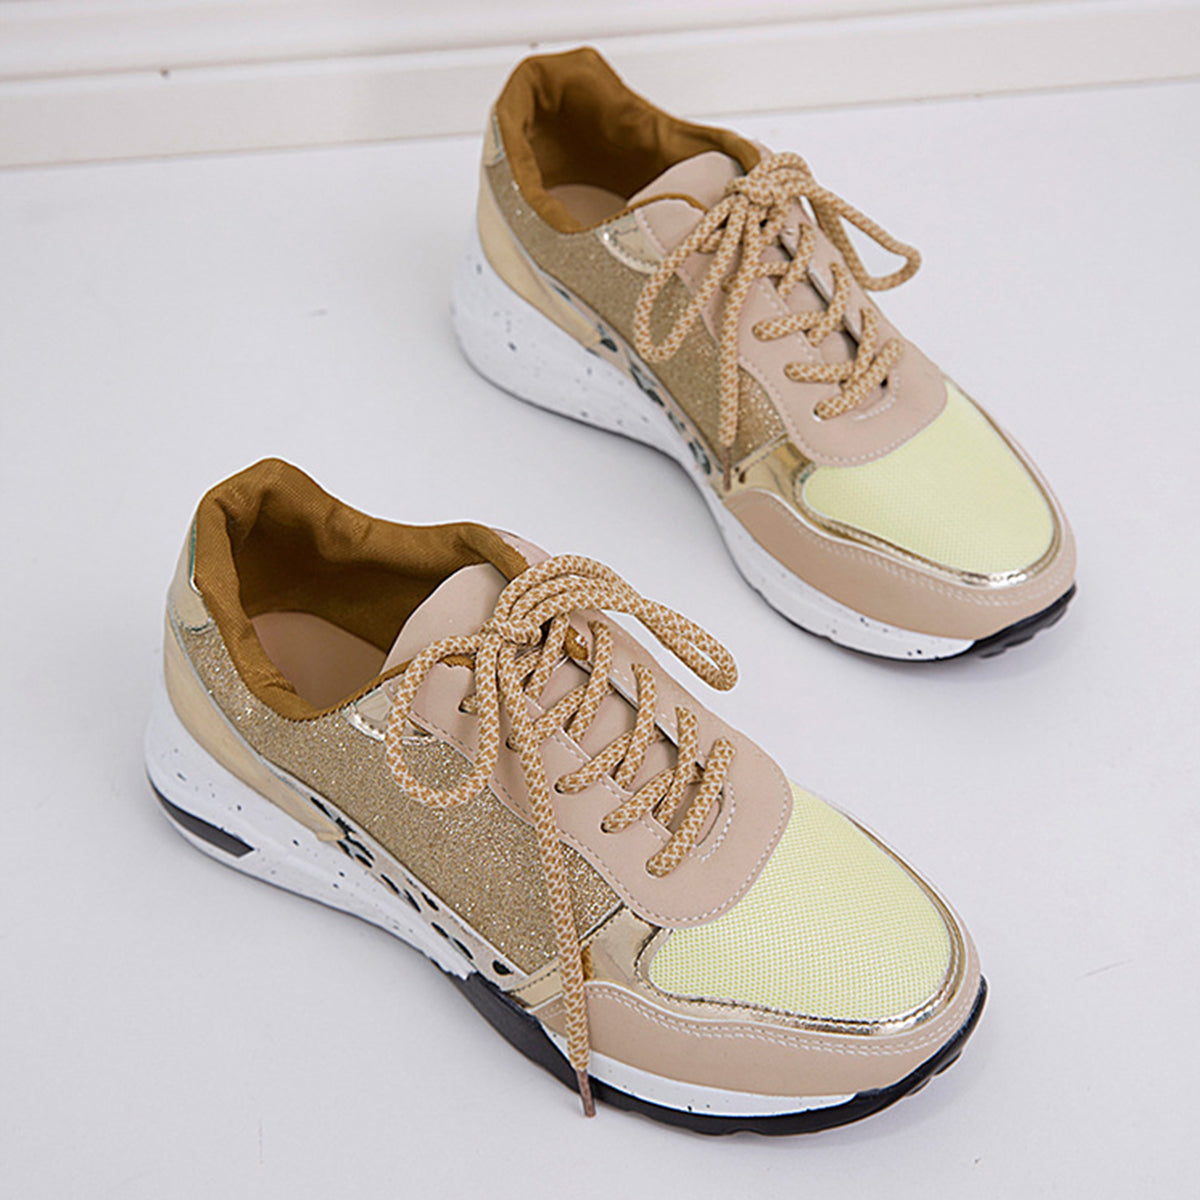 PREORDER- Lace-Up Round Toe Platform Sneakers